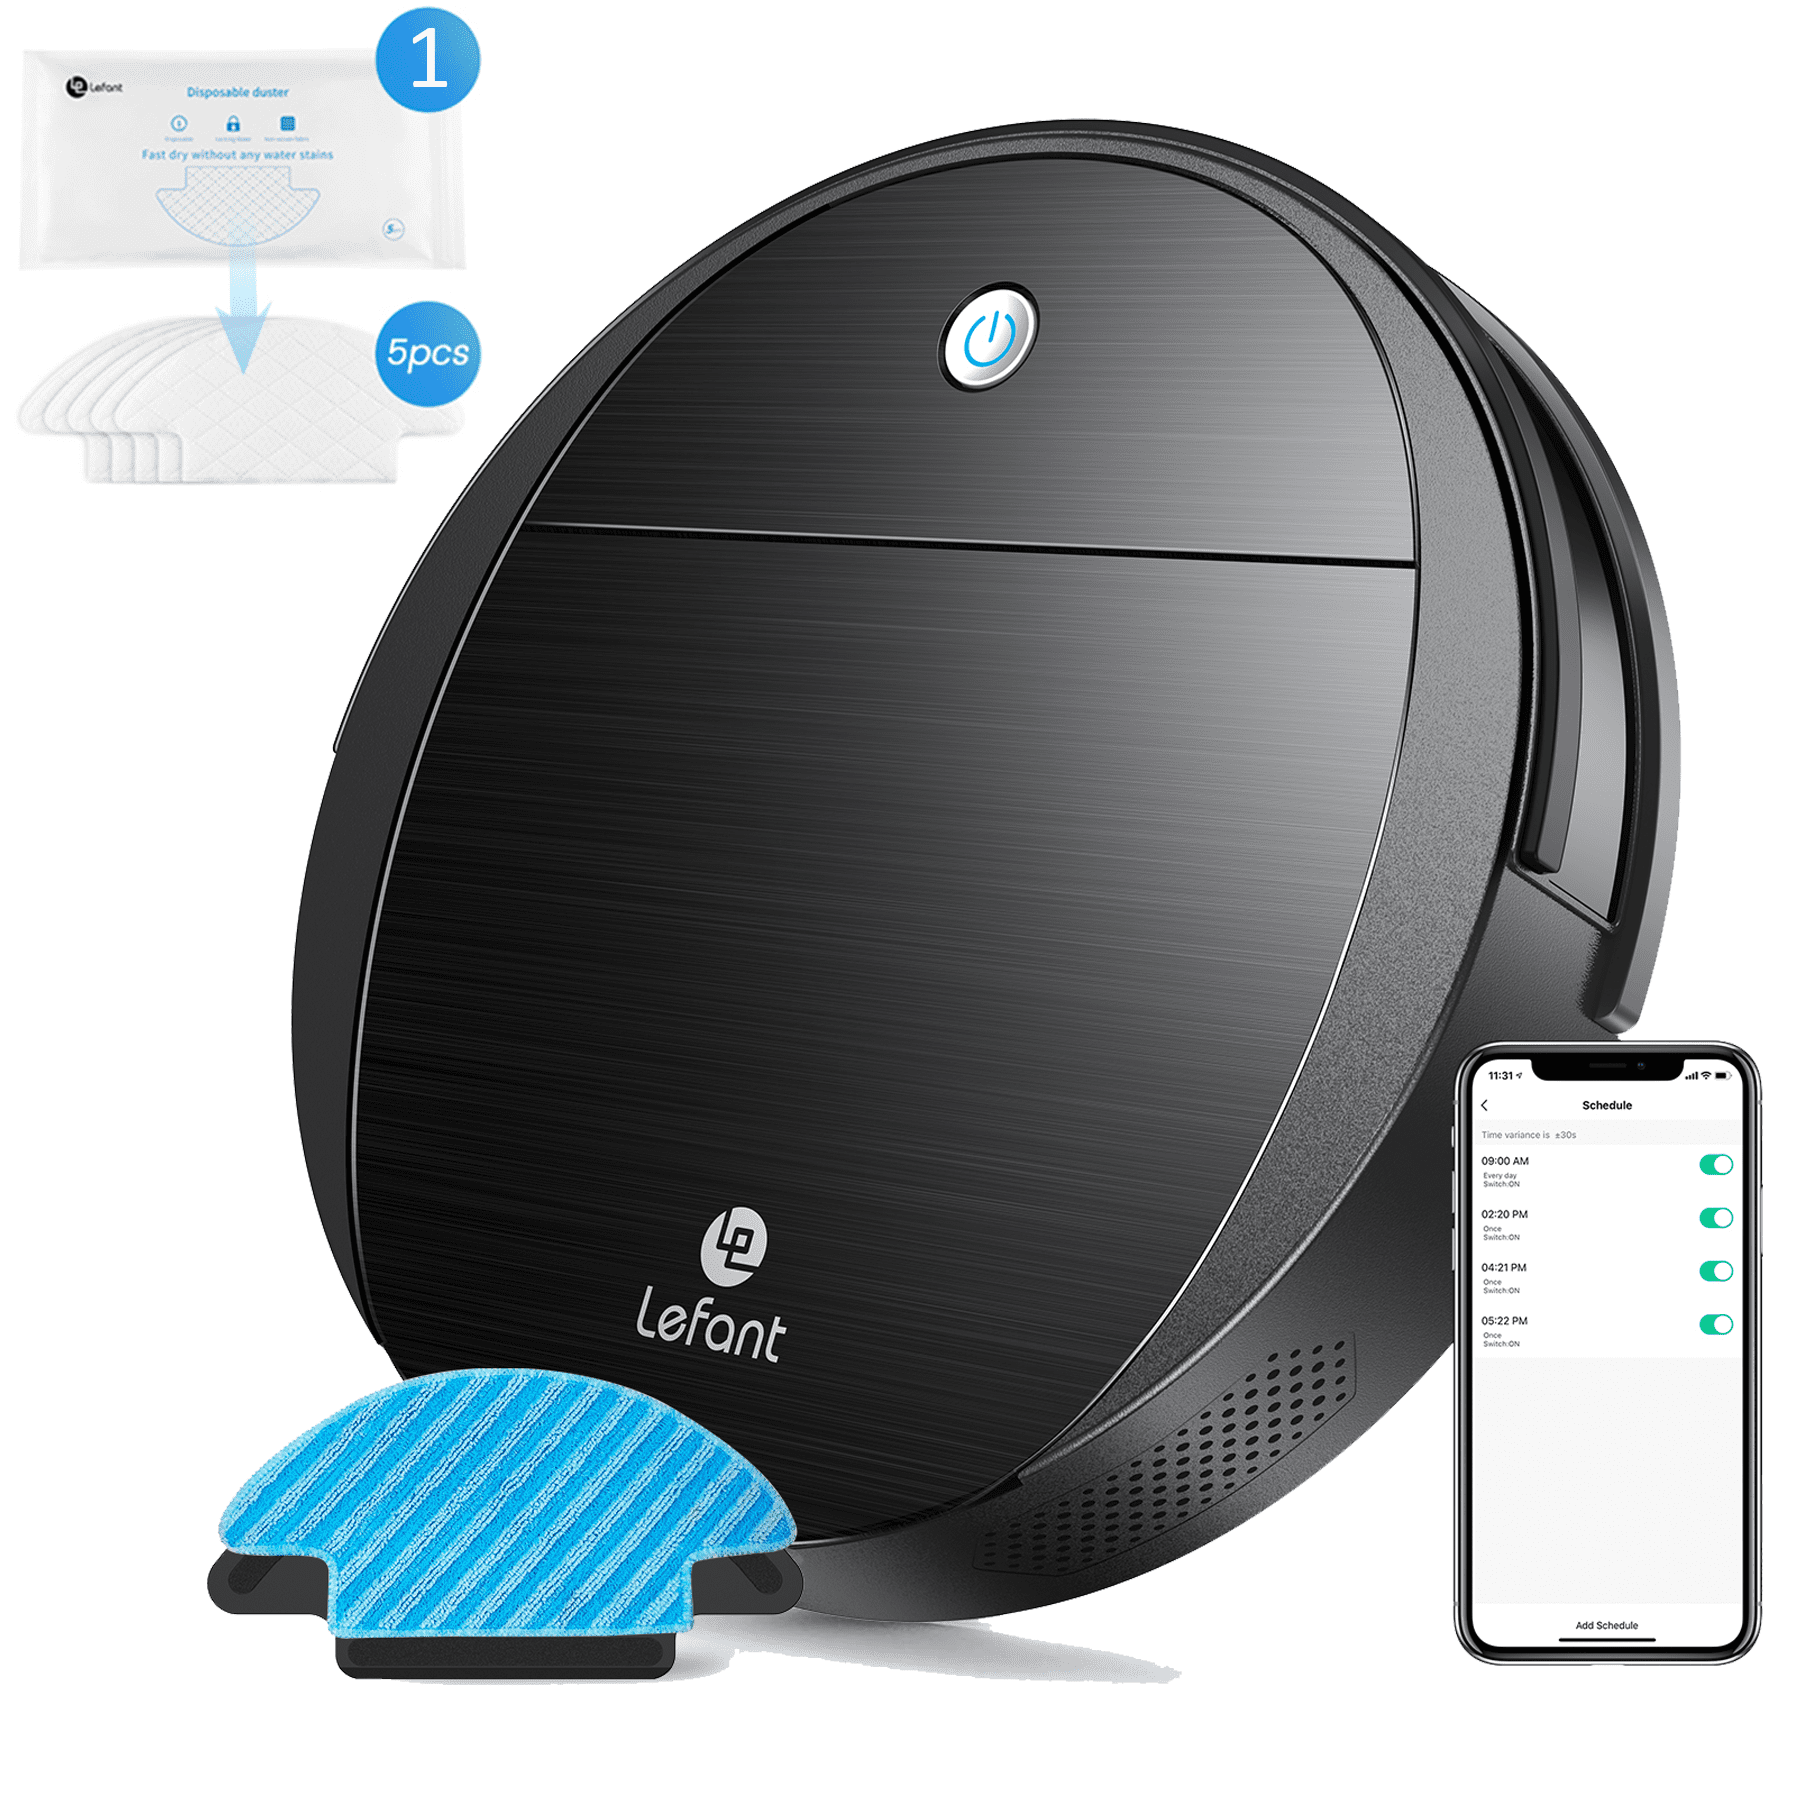 Lefant Robot Vacuum Cleaner, Tangle-Free Suction, Slim, Quite, Automatic  Self-Charging, Wi-Fi/App/Alexa/Remote Control, Good for Pet Hair, Hard  Floor